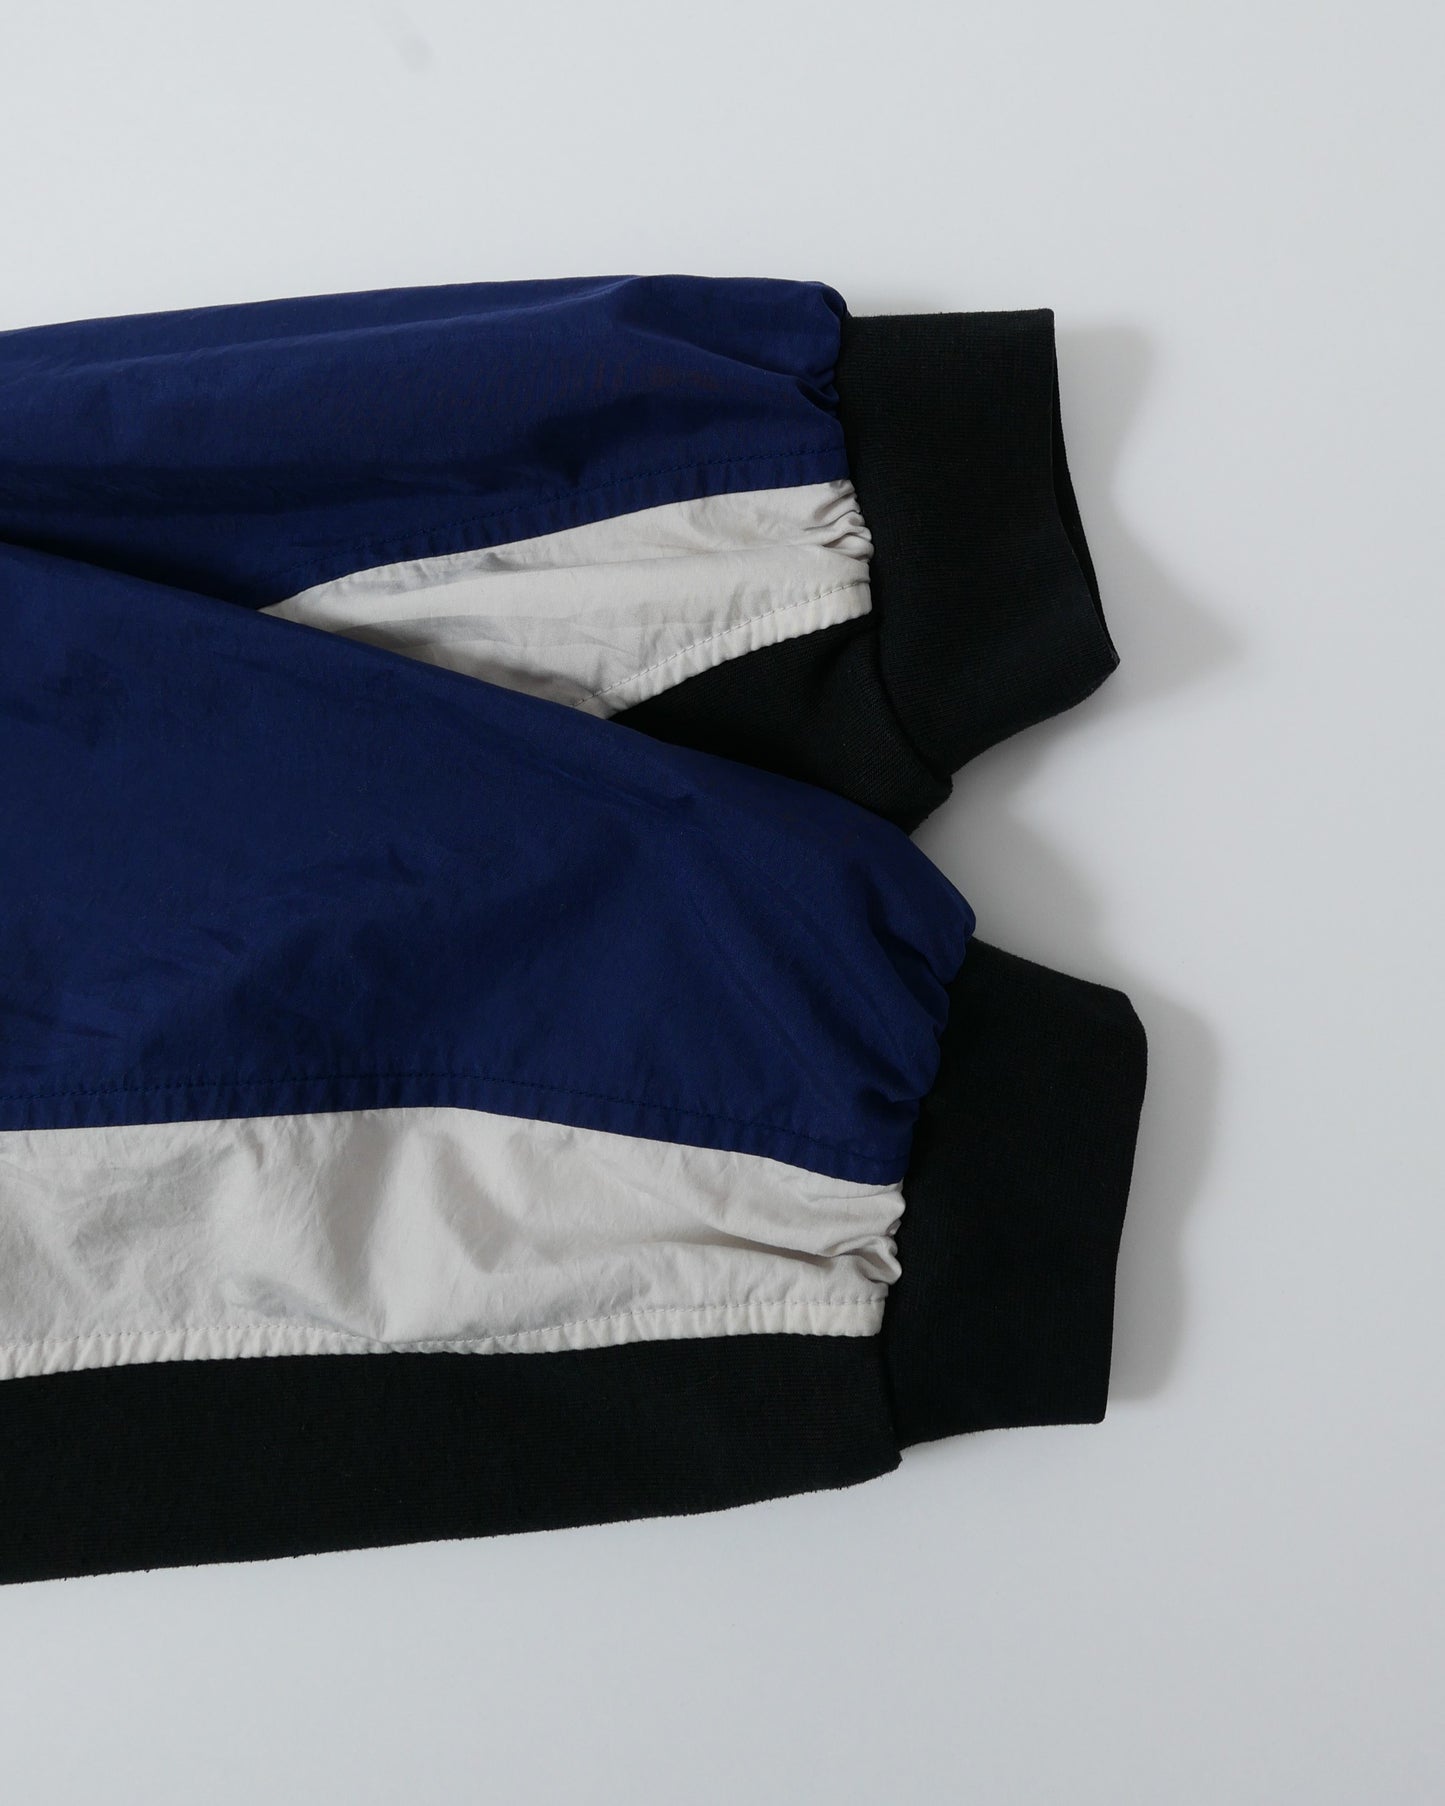 ADIDAS / 90’s Pullover Top -L～XL-